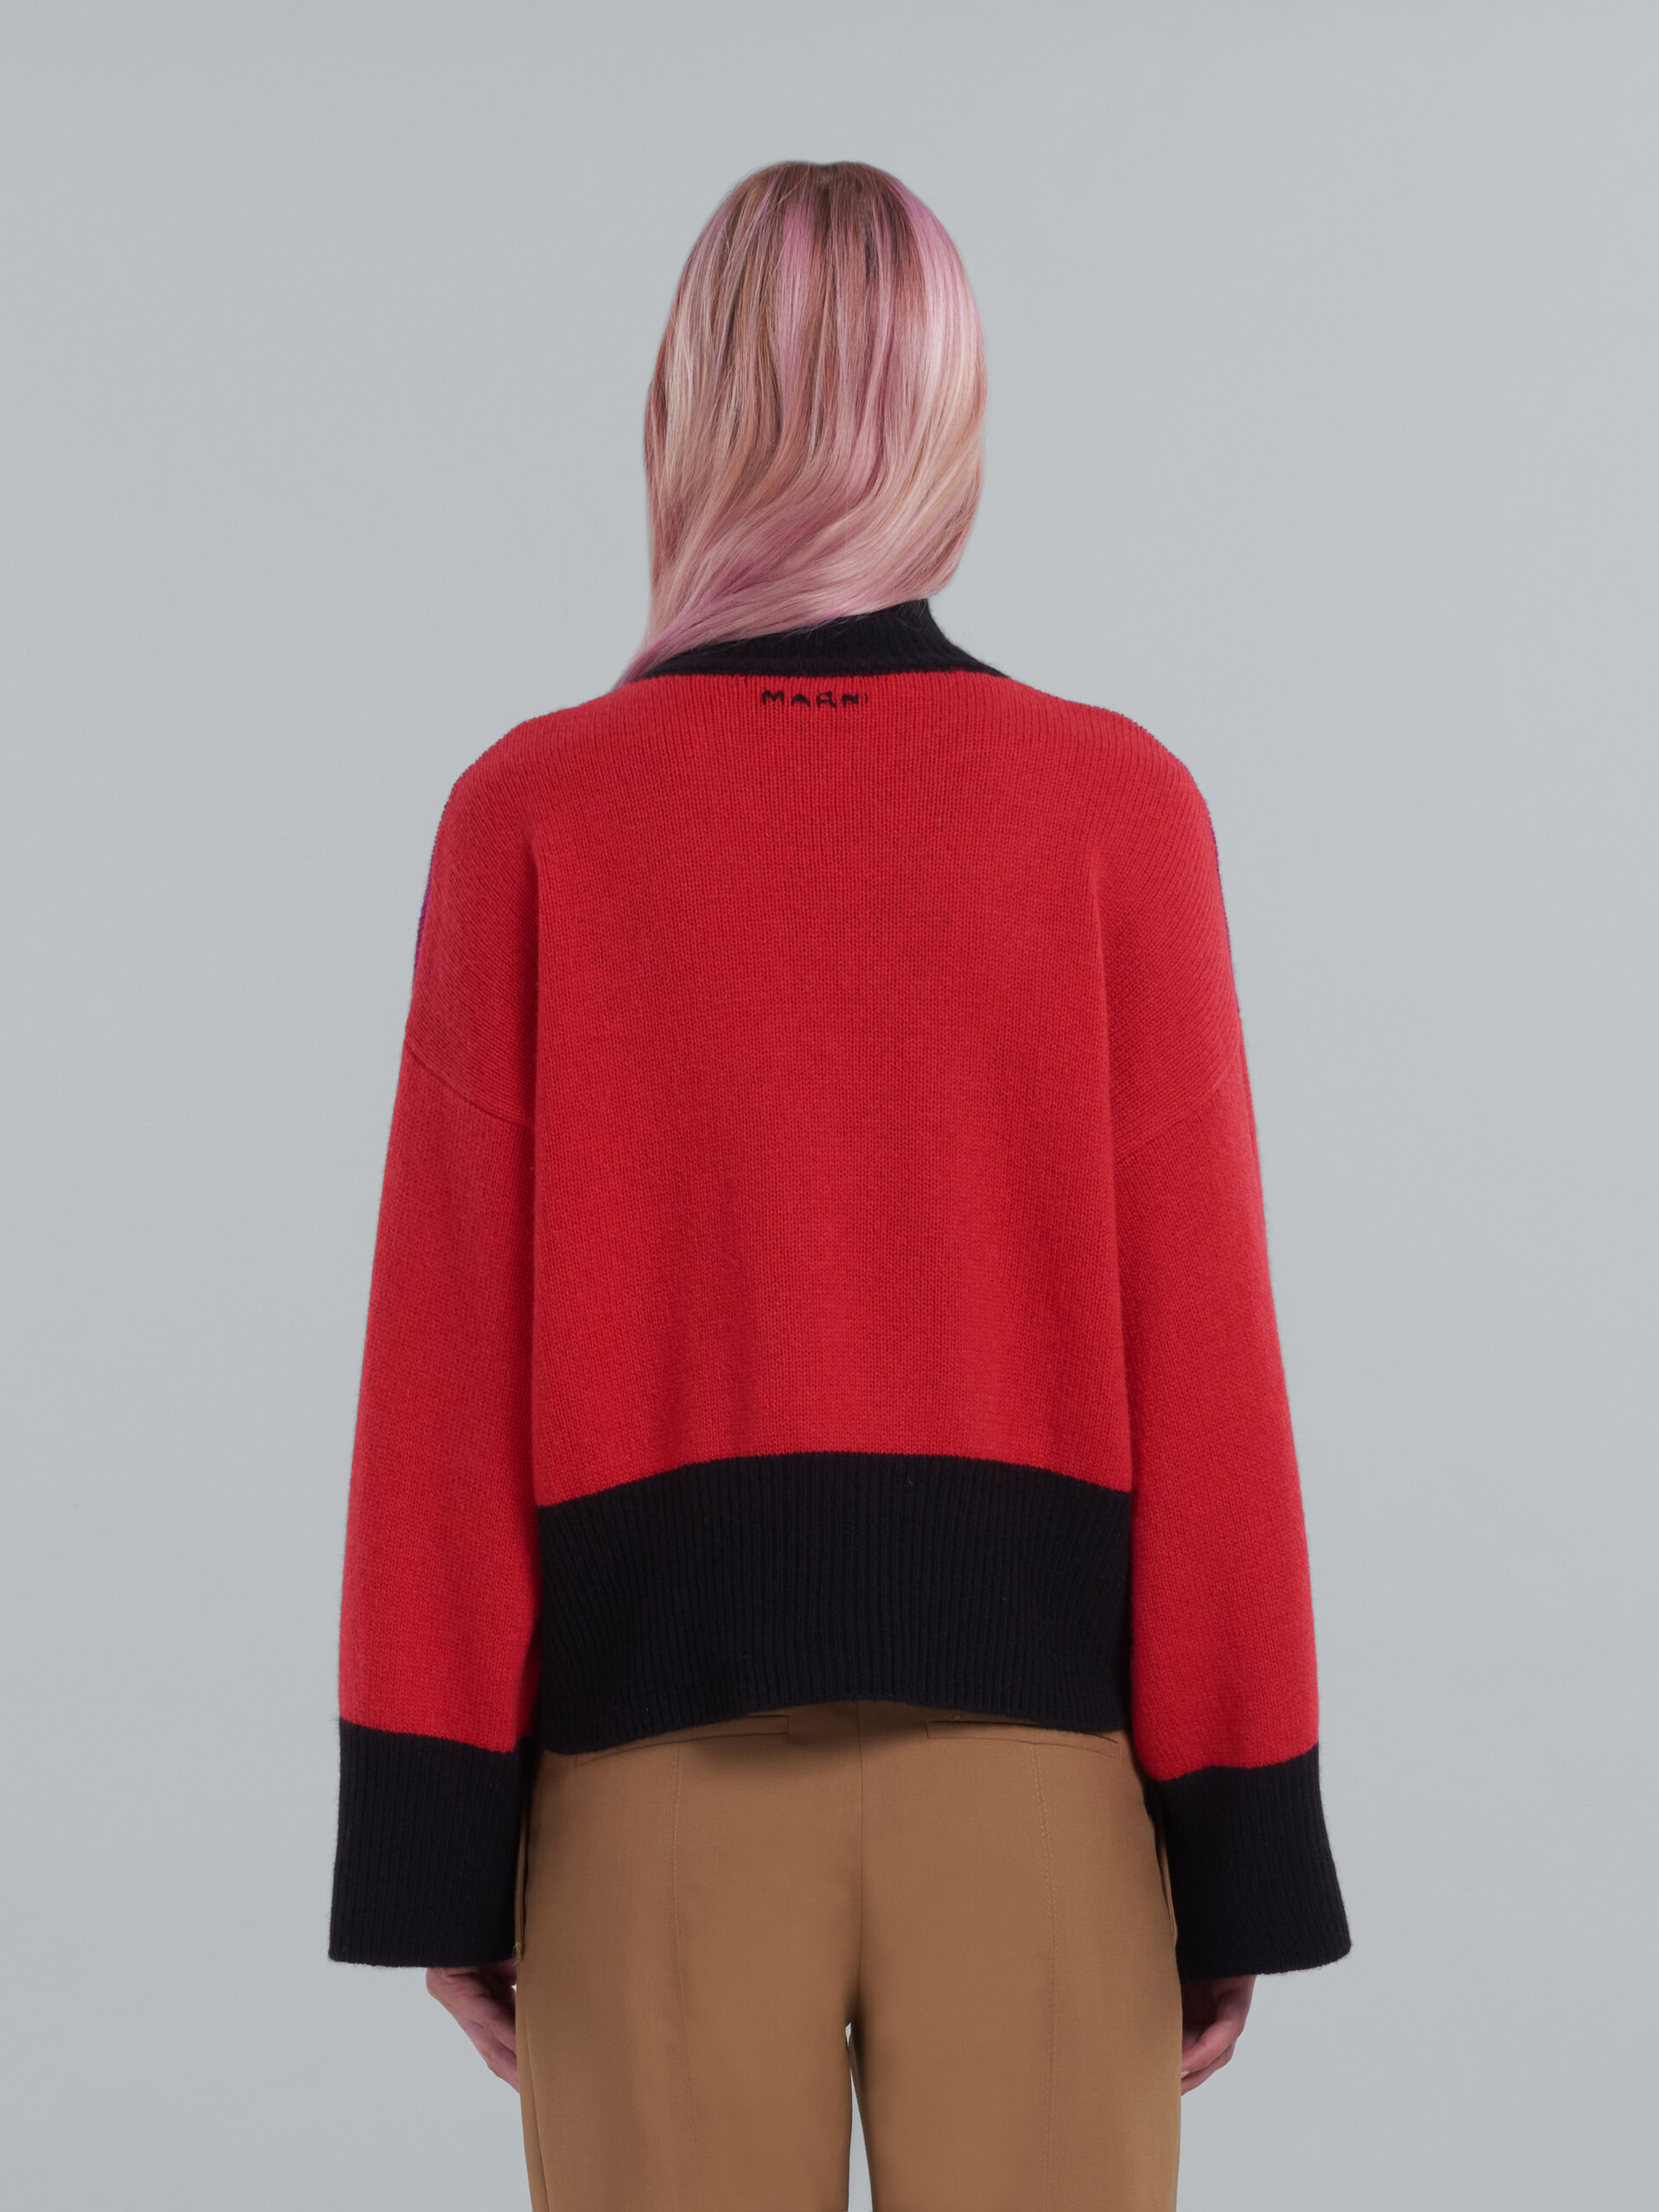 Cashmere cropped T-neck sweater - Pullovers - Image 3